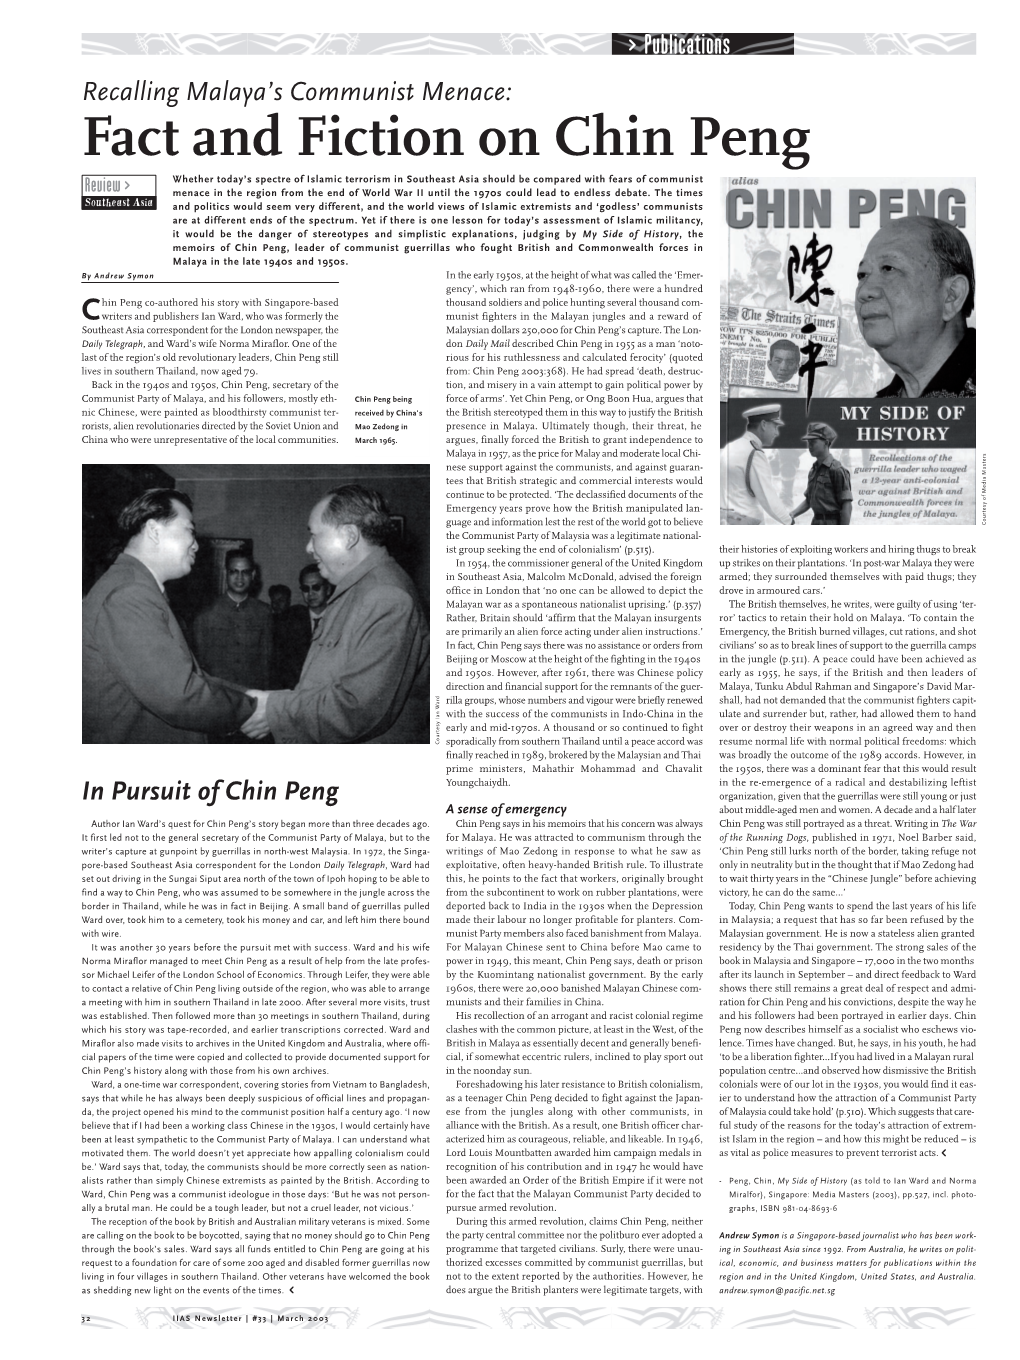 Fact and Fiction on Chin Peng